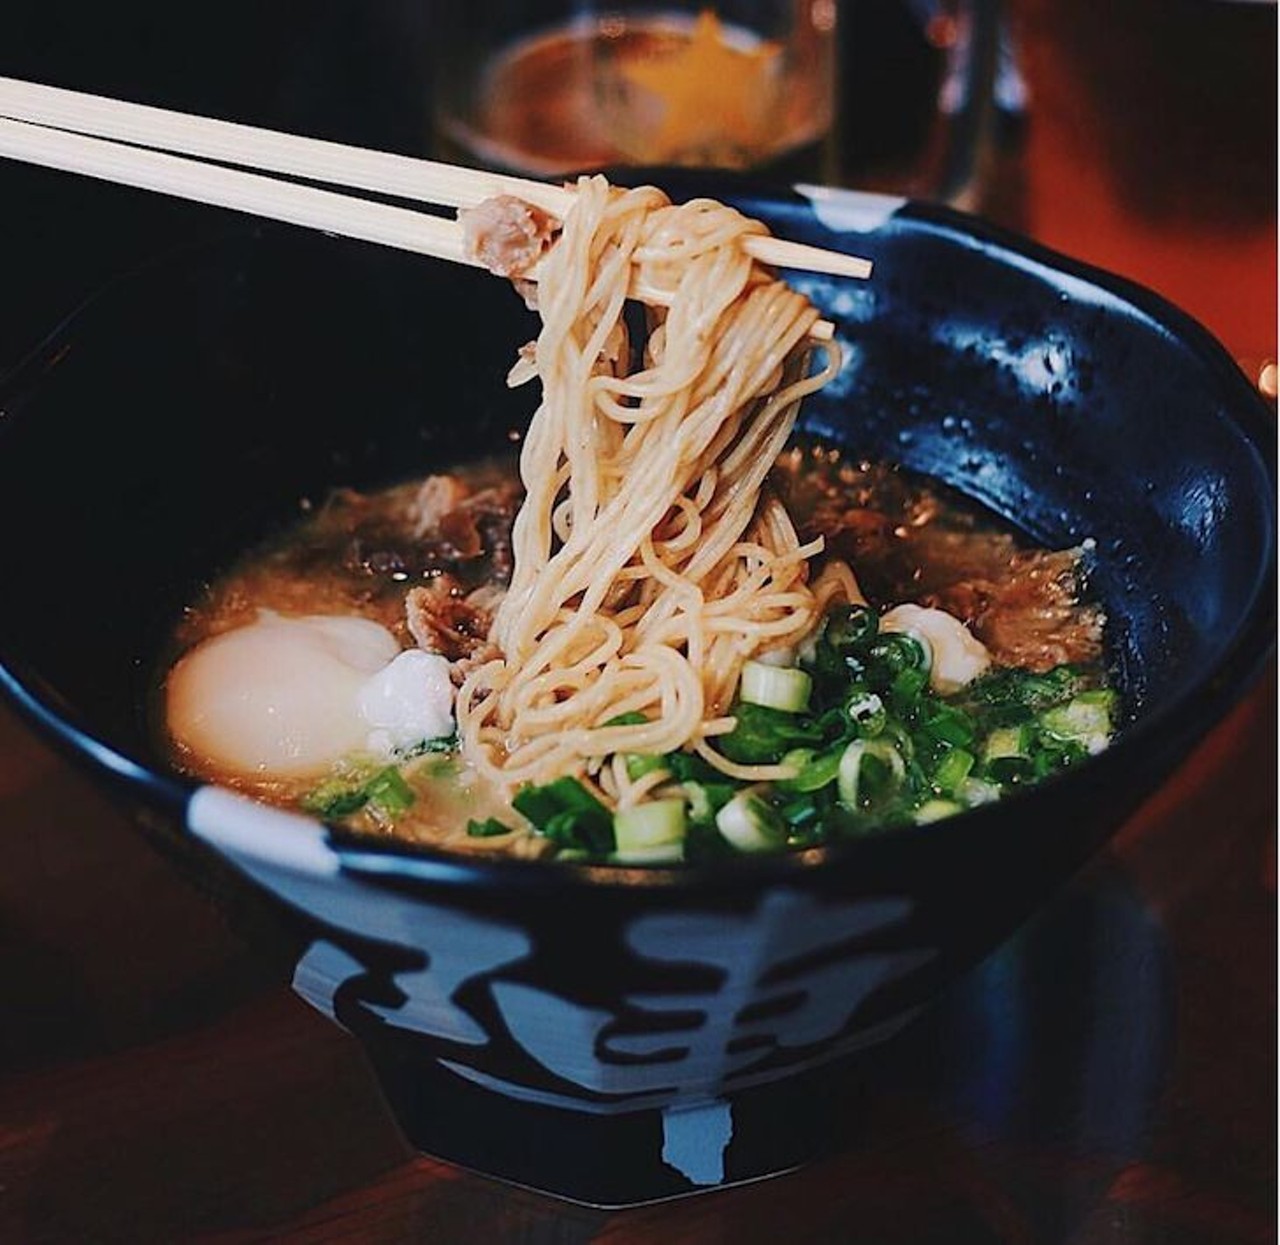 Jinya Ramen Bar
Thornton Park will be home to the first Florida locale of the popular ramen bar chain known for their tonkotsu. The menu also promises rice bowls, Japanese curries, mini tacos and a host of small plates.
(Opening spring; 8 N. Summerlin Ave.; 
jinya-ramenbar.com)
Photo via Jinya Ramen Bar/Instagram